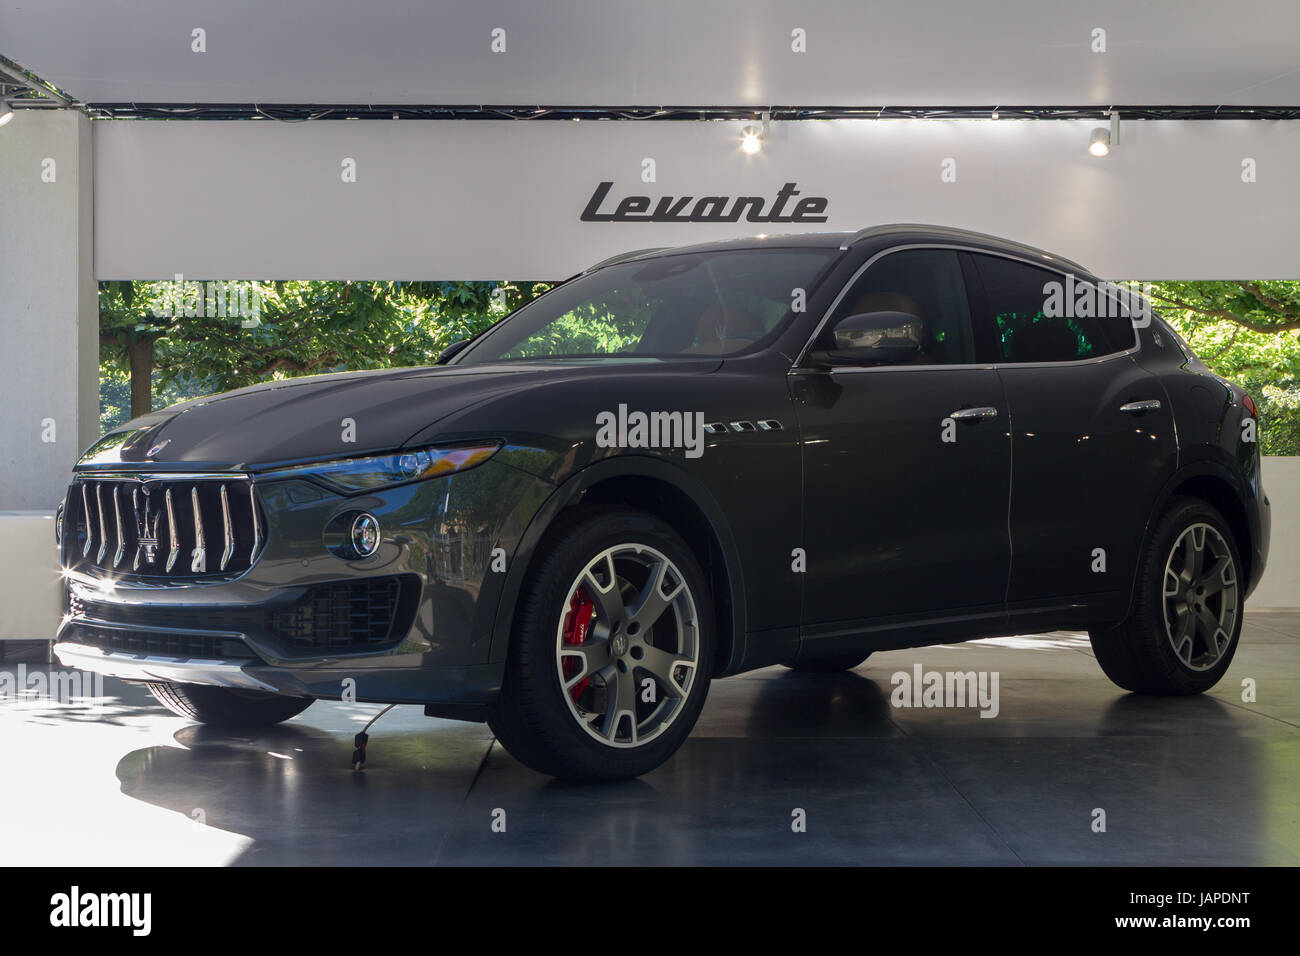 Turin, Italy, 7th June 2017. A Maserati Levante. Third edition of Parco Valentino car show hosts cars by many automobile manufacturers and car designers inside Valentino Park in Torino, Italy. Stock Photo